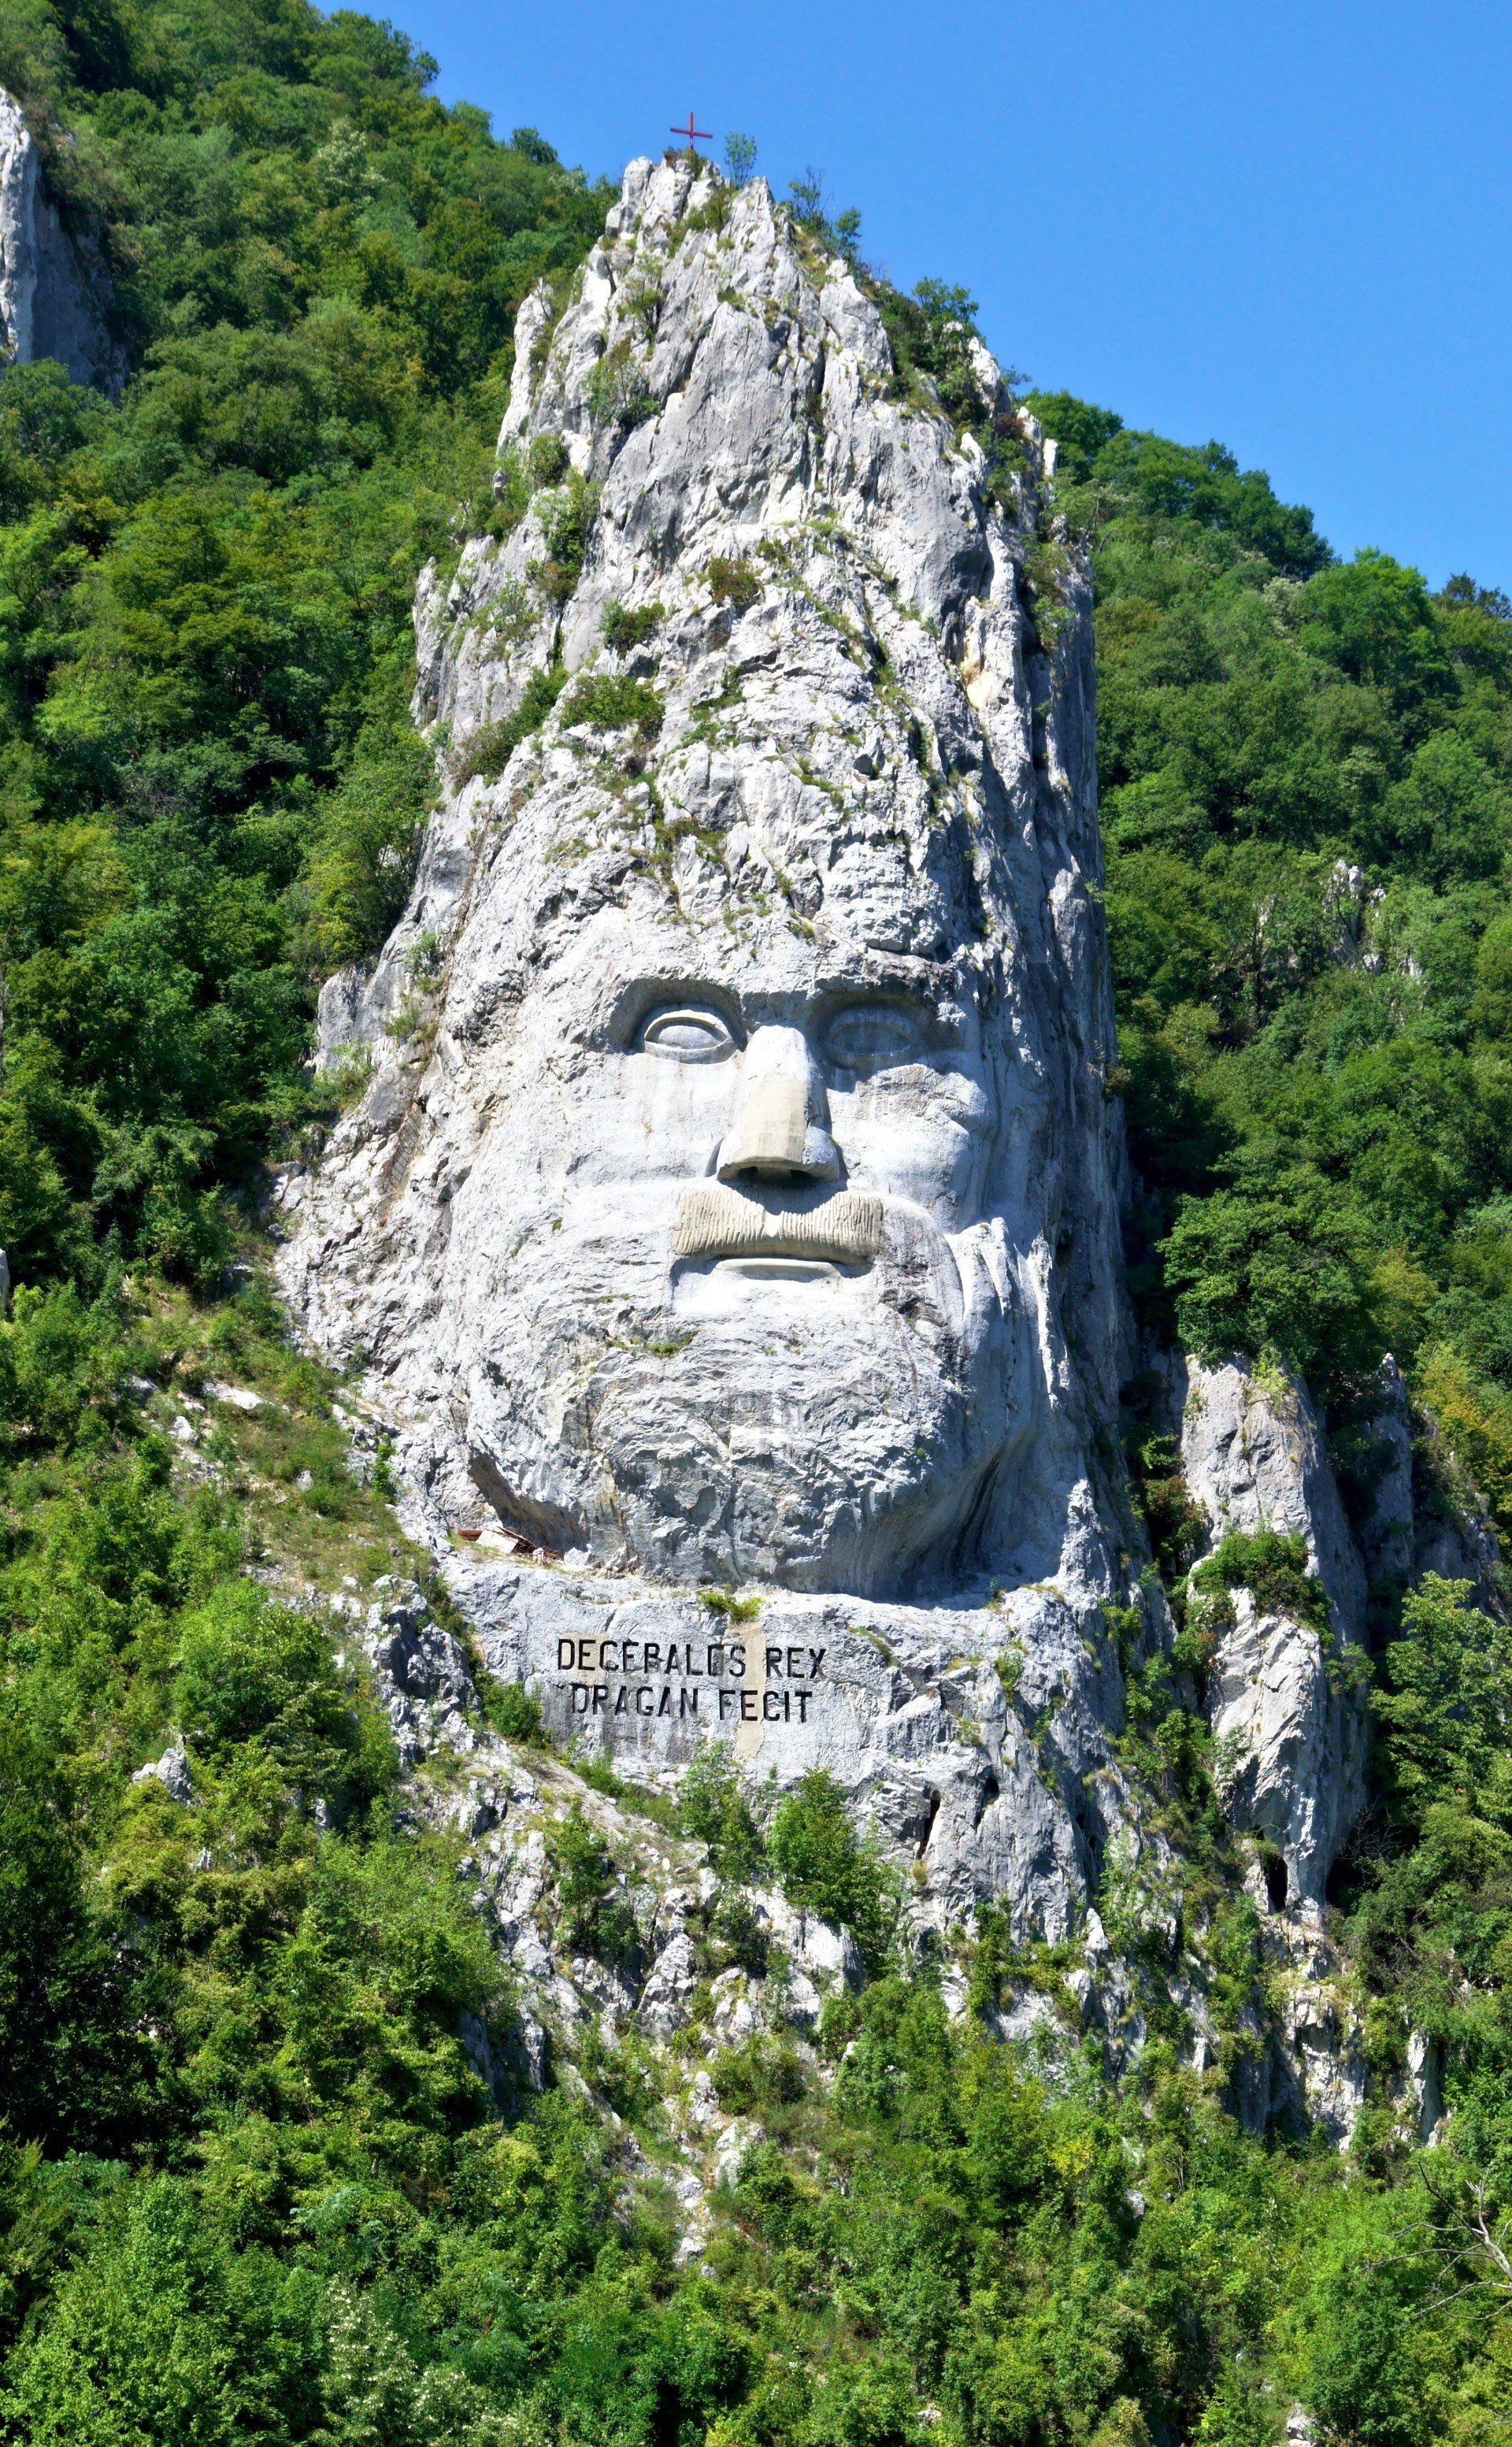 The rock sculpture of  Decebalus (Romanian: Chipul regelui dac Decebal) is a 42.9 m (141 ft) in height and 31.6 m (104 ft) in width carving in rock of the face of Decebalus (r. AD 87–106), the last king of Dacia, who fought against the Roman emperors Domitian and Trajan to preserve the independence of his country, which corresponded to modern Romania; it was made between 1994 and 2004, on a rocky outcrop on the river Danube, at the Iron Gates, and sets the world record for being the World's Largest rock sculpture on a river's bank, according to the World Record Academy. Photo: Yanko Malinov 